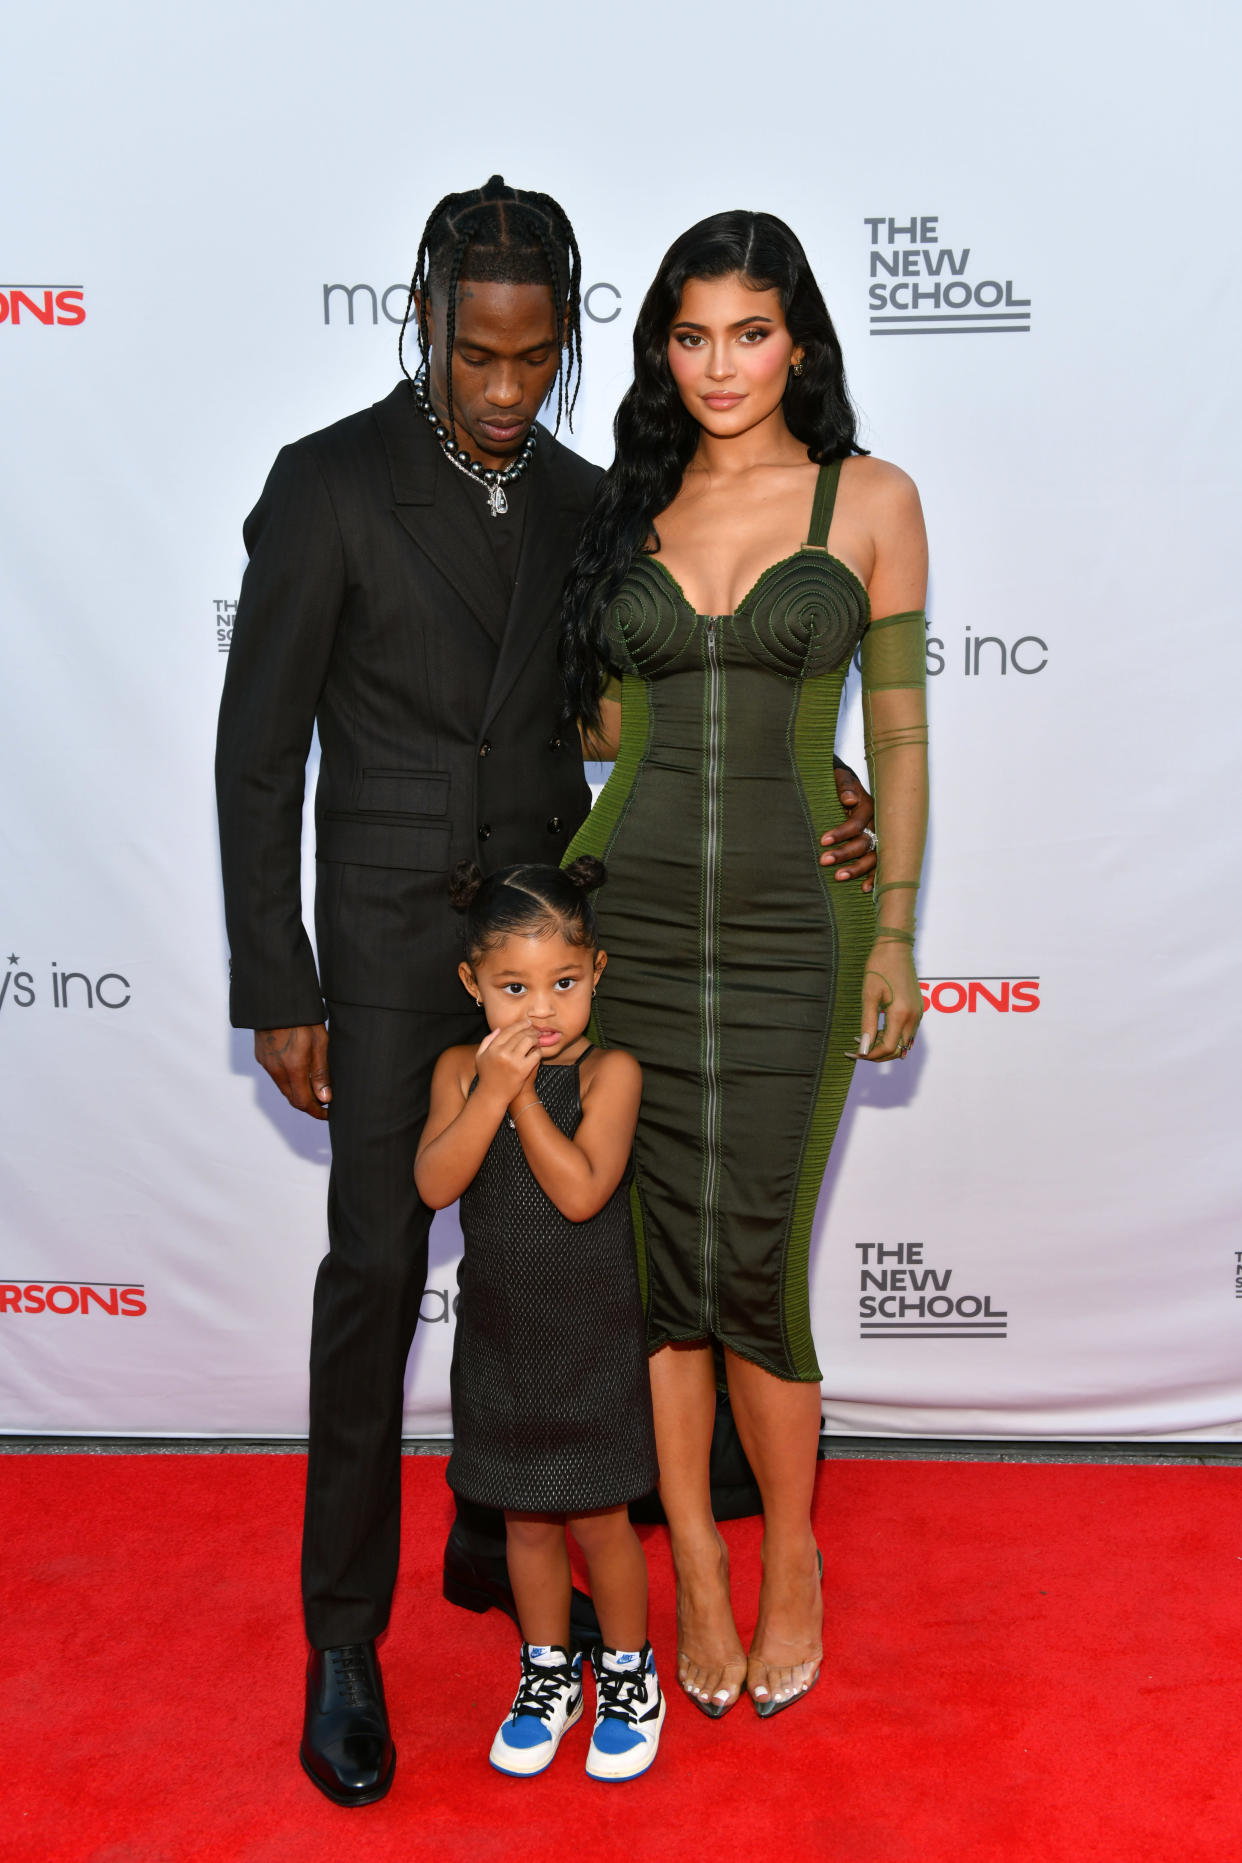 Little Stormi previously appeared with her parents at the The 72nd Annual Parsons Benefit in June 2021. (Photo by Craig Barritt/Getty Images for The New School)